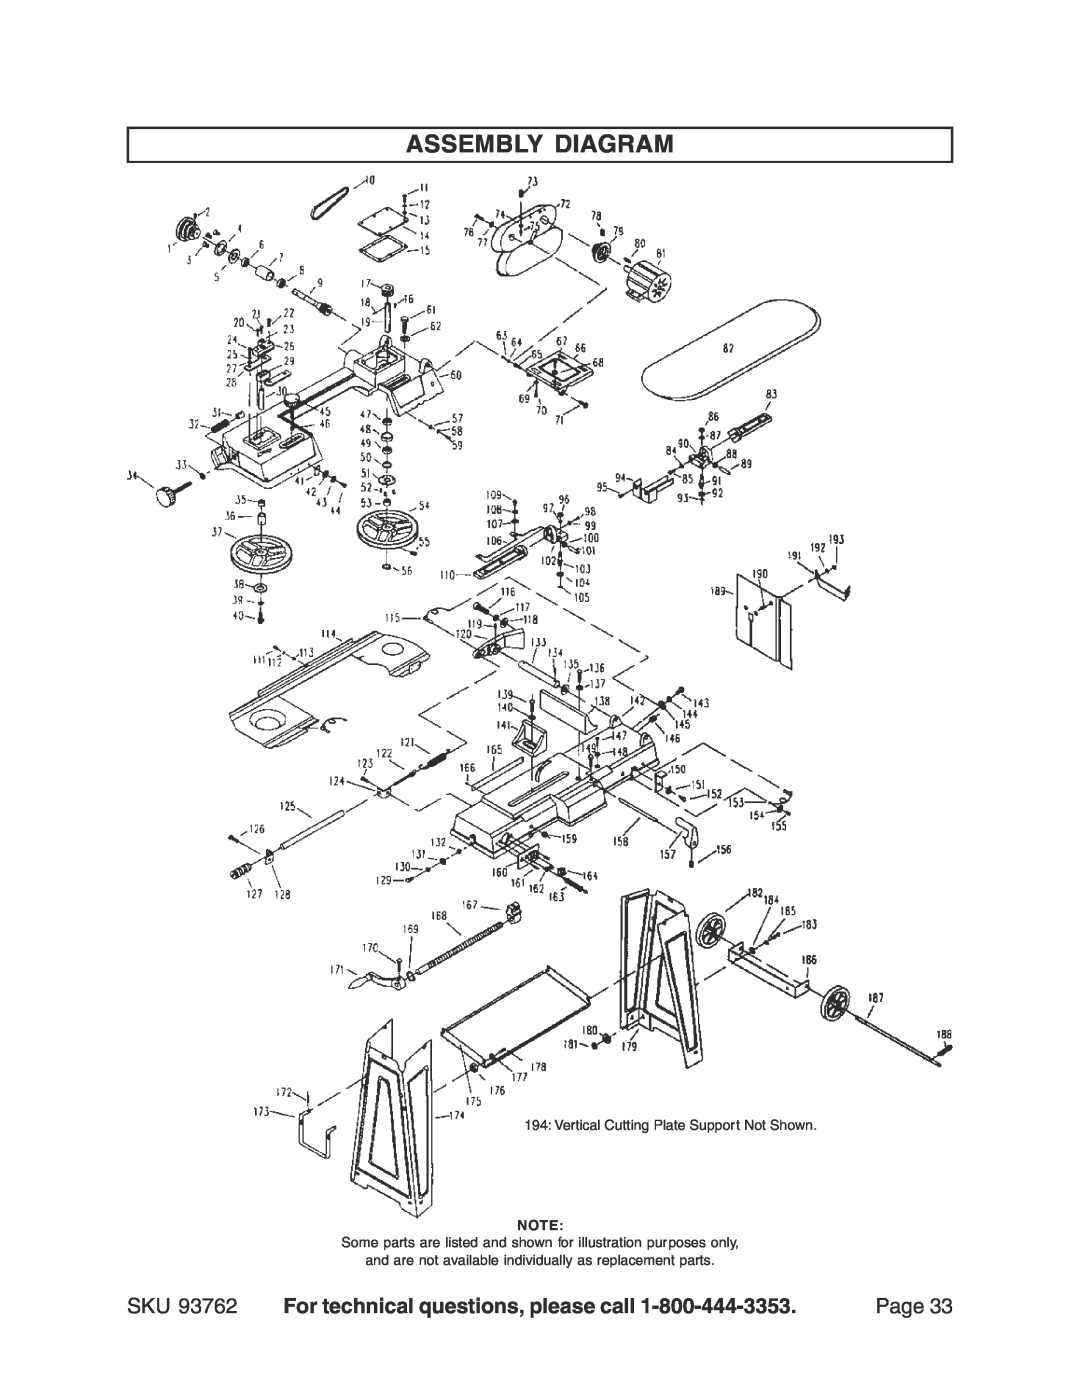 Harbor Freight Tools 93762 operating instructions Assembly Diagram, For technical questions, please call, Page 